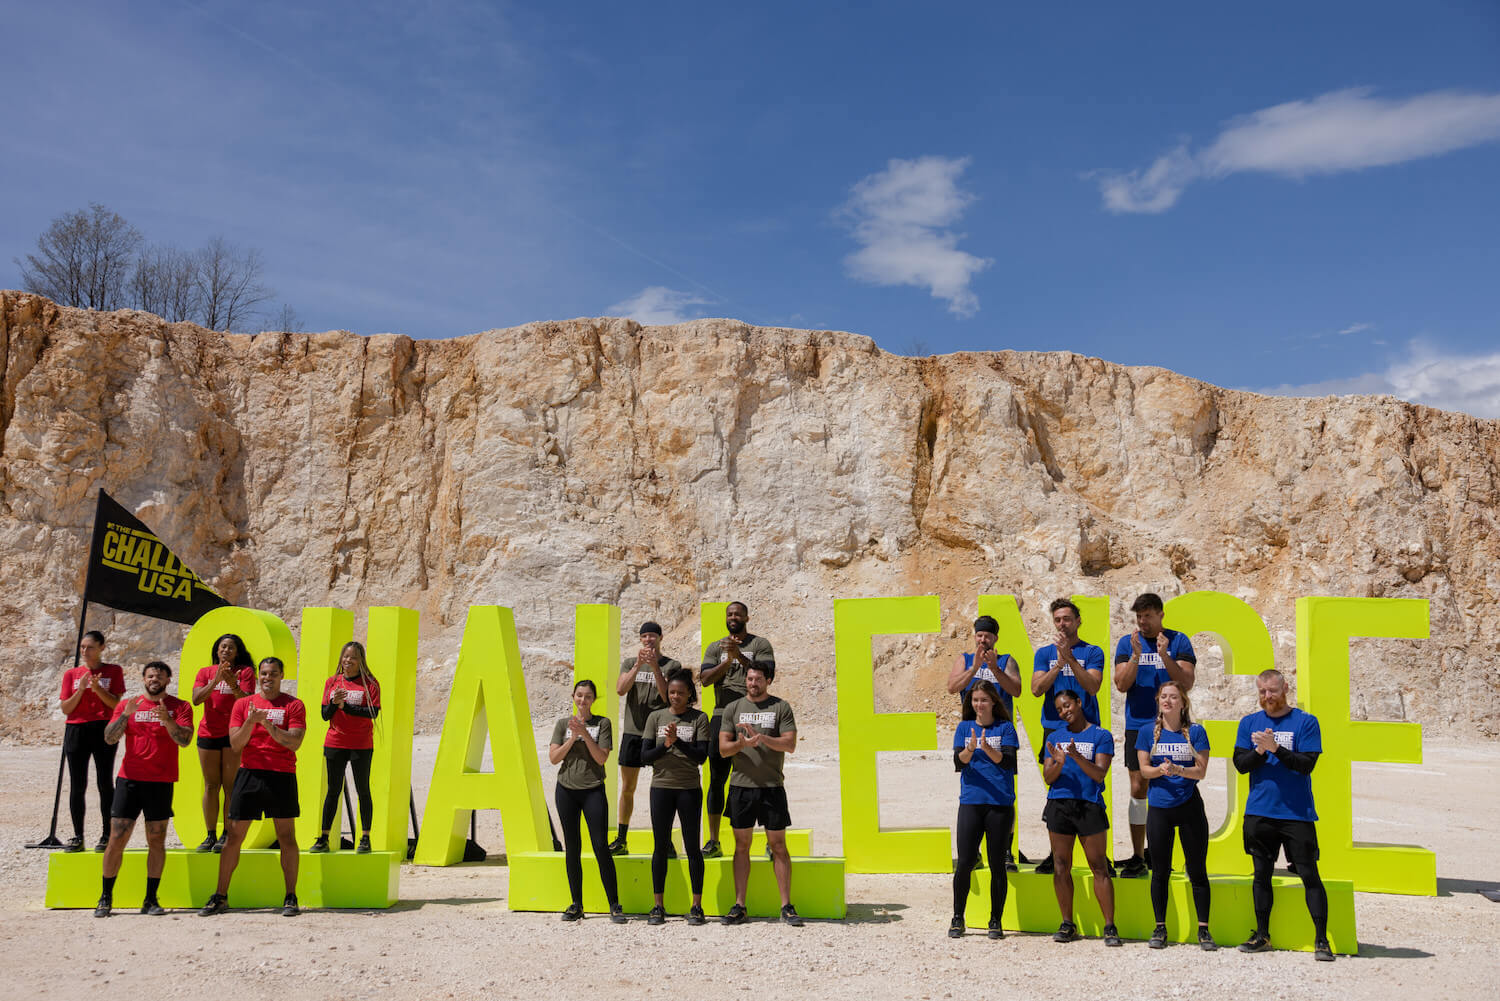 'The Challenge: USA' Season 2 Week 4 competitors standing in front of 'The Challenge' sign outside in their teams